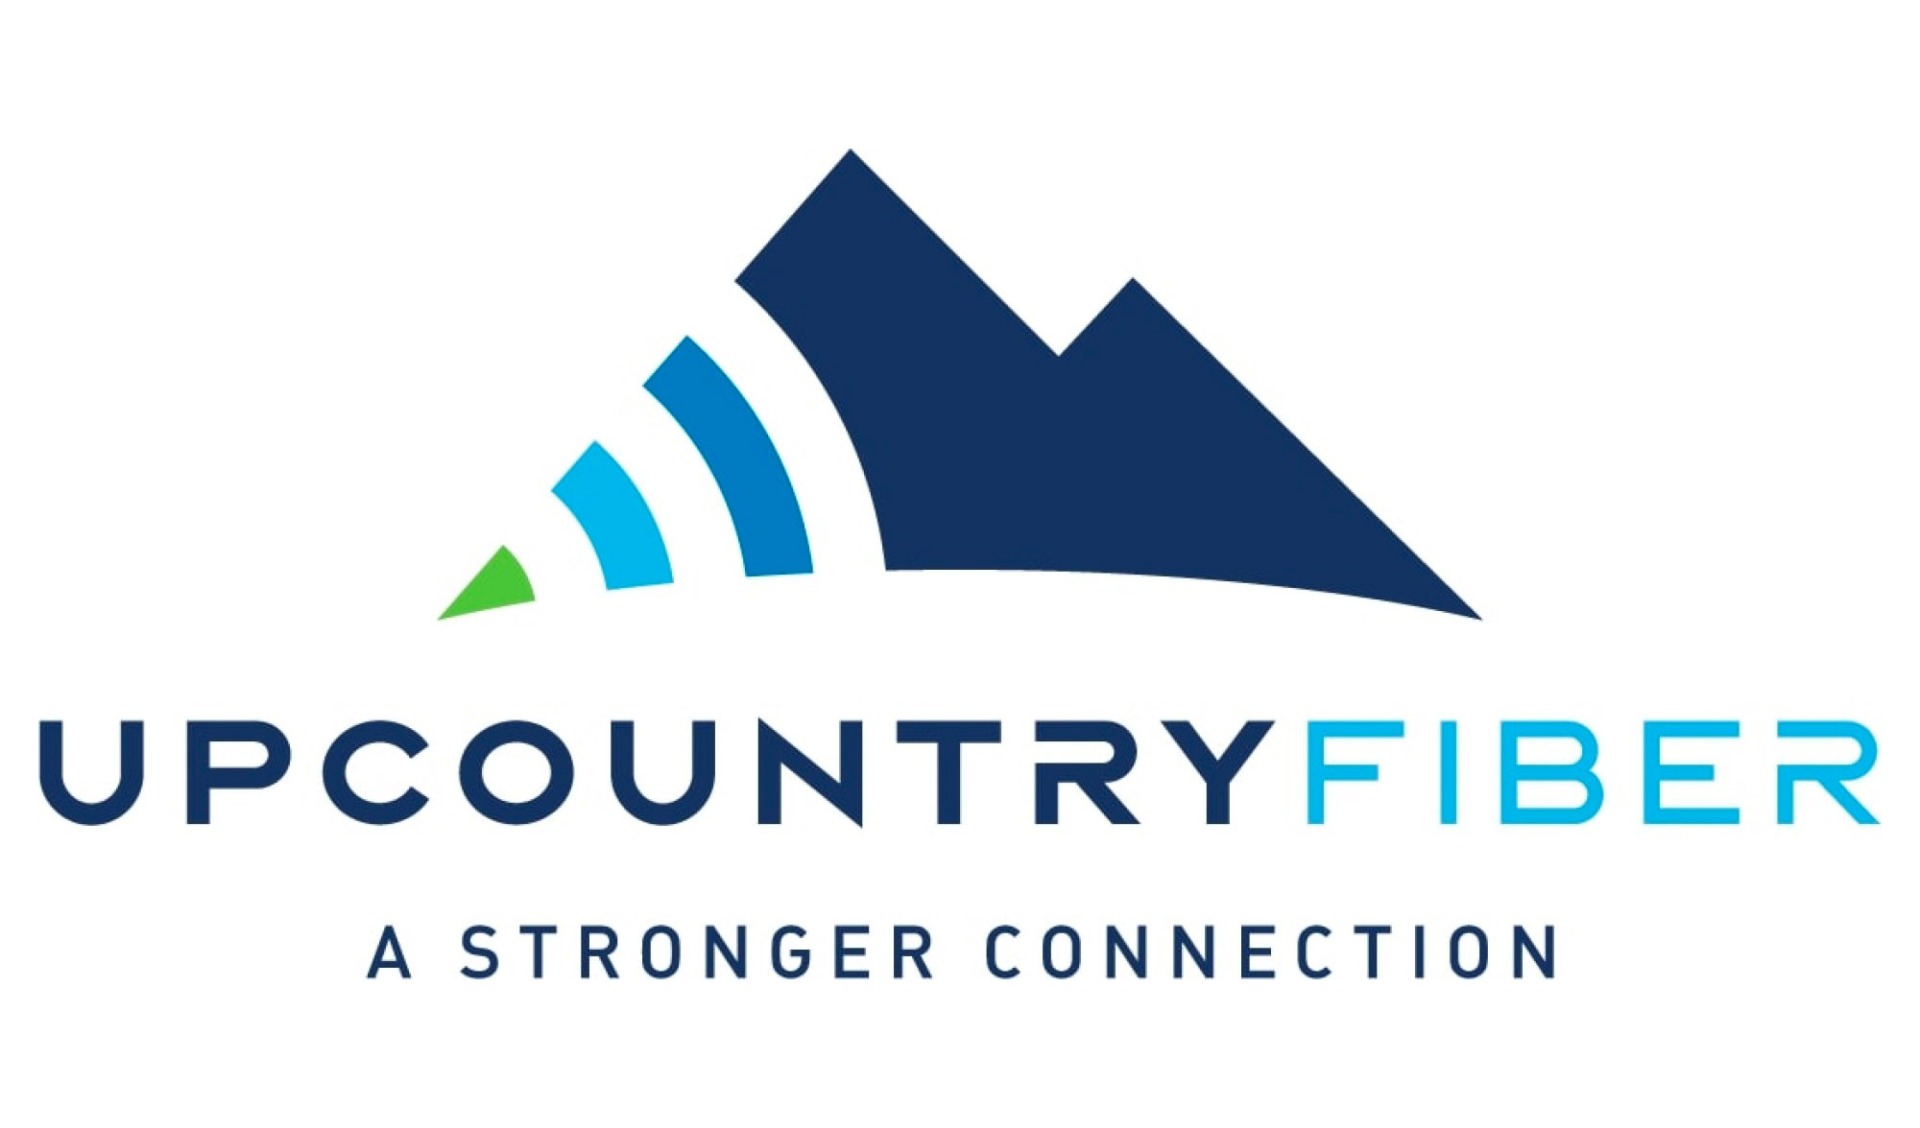 upcountry-fiber-featured-partners-the-roar-wccp-fm